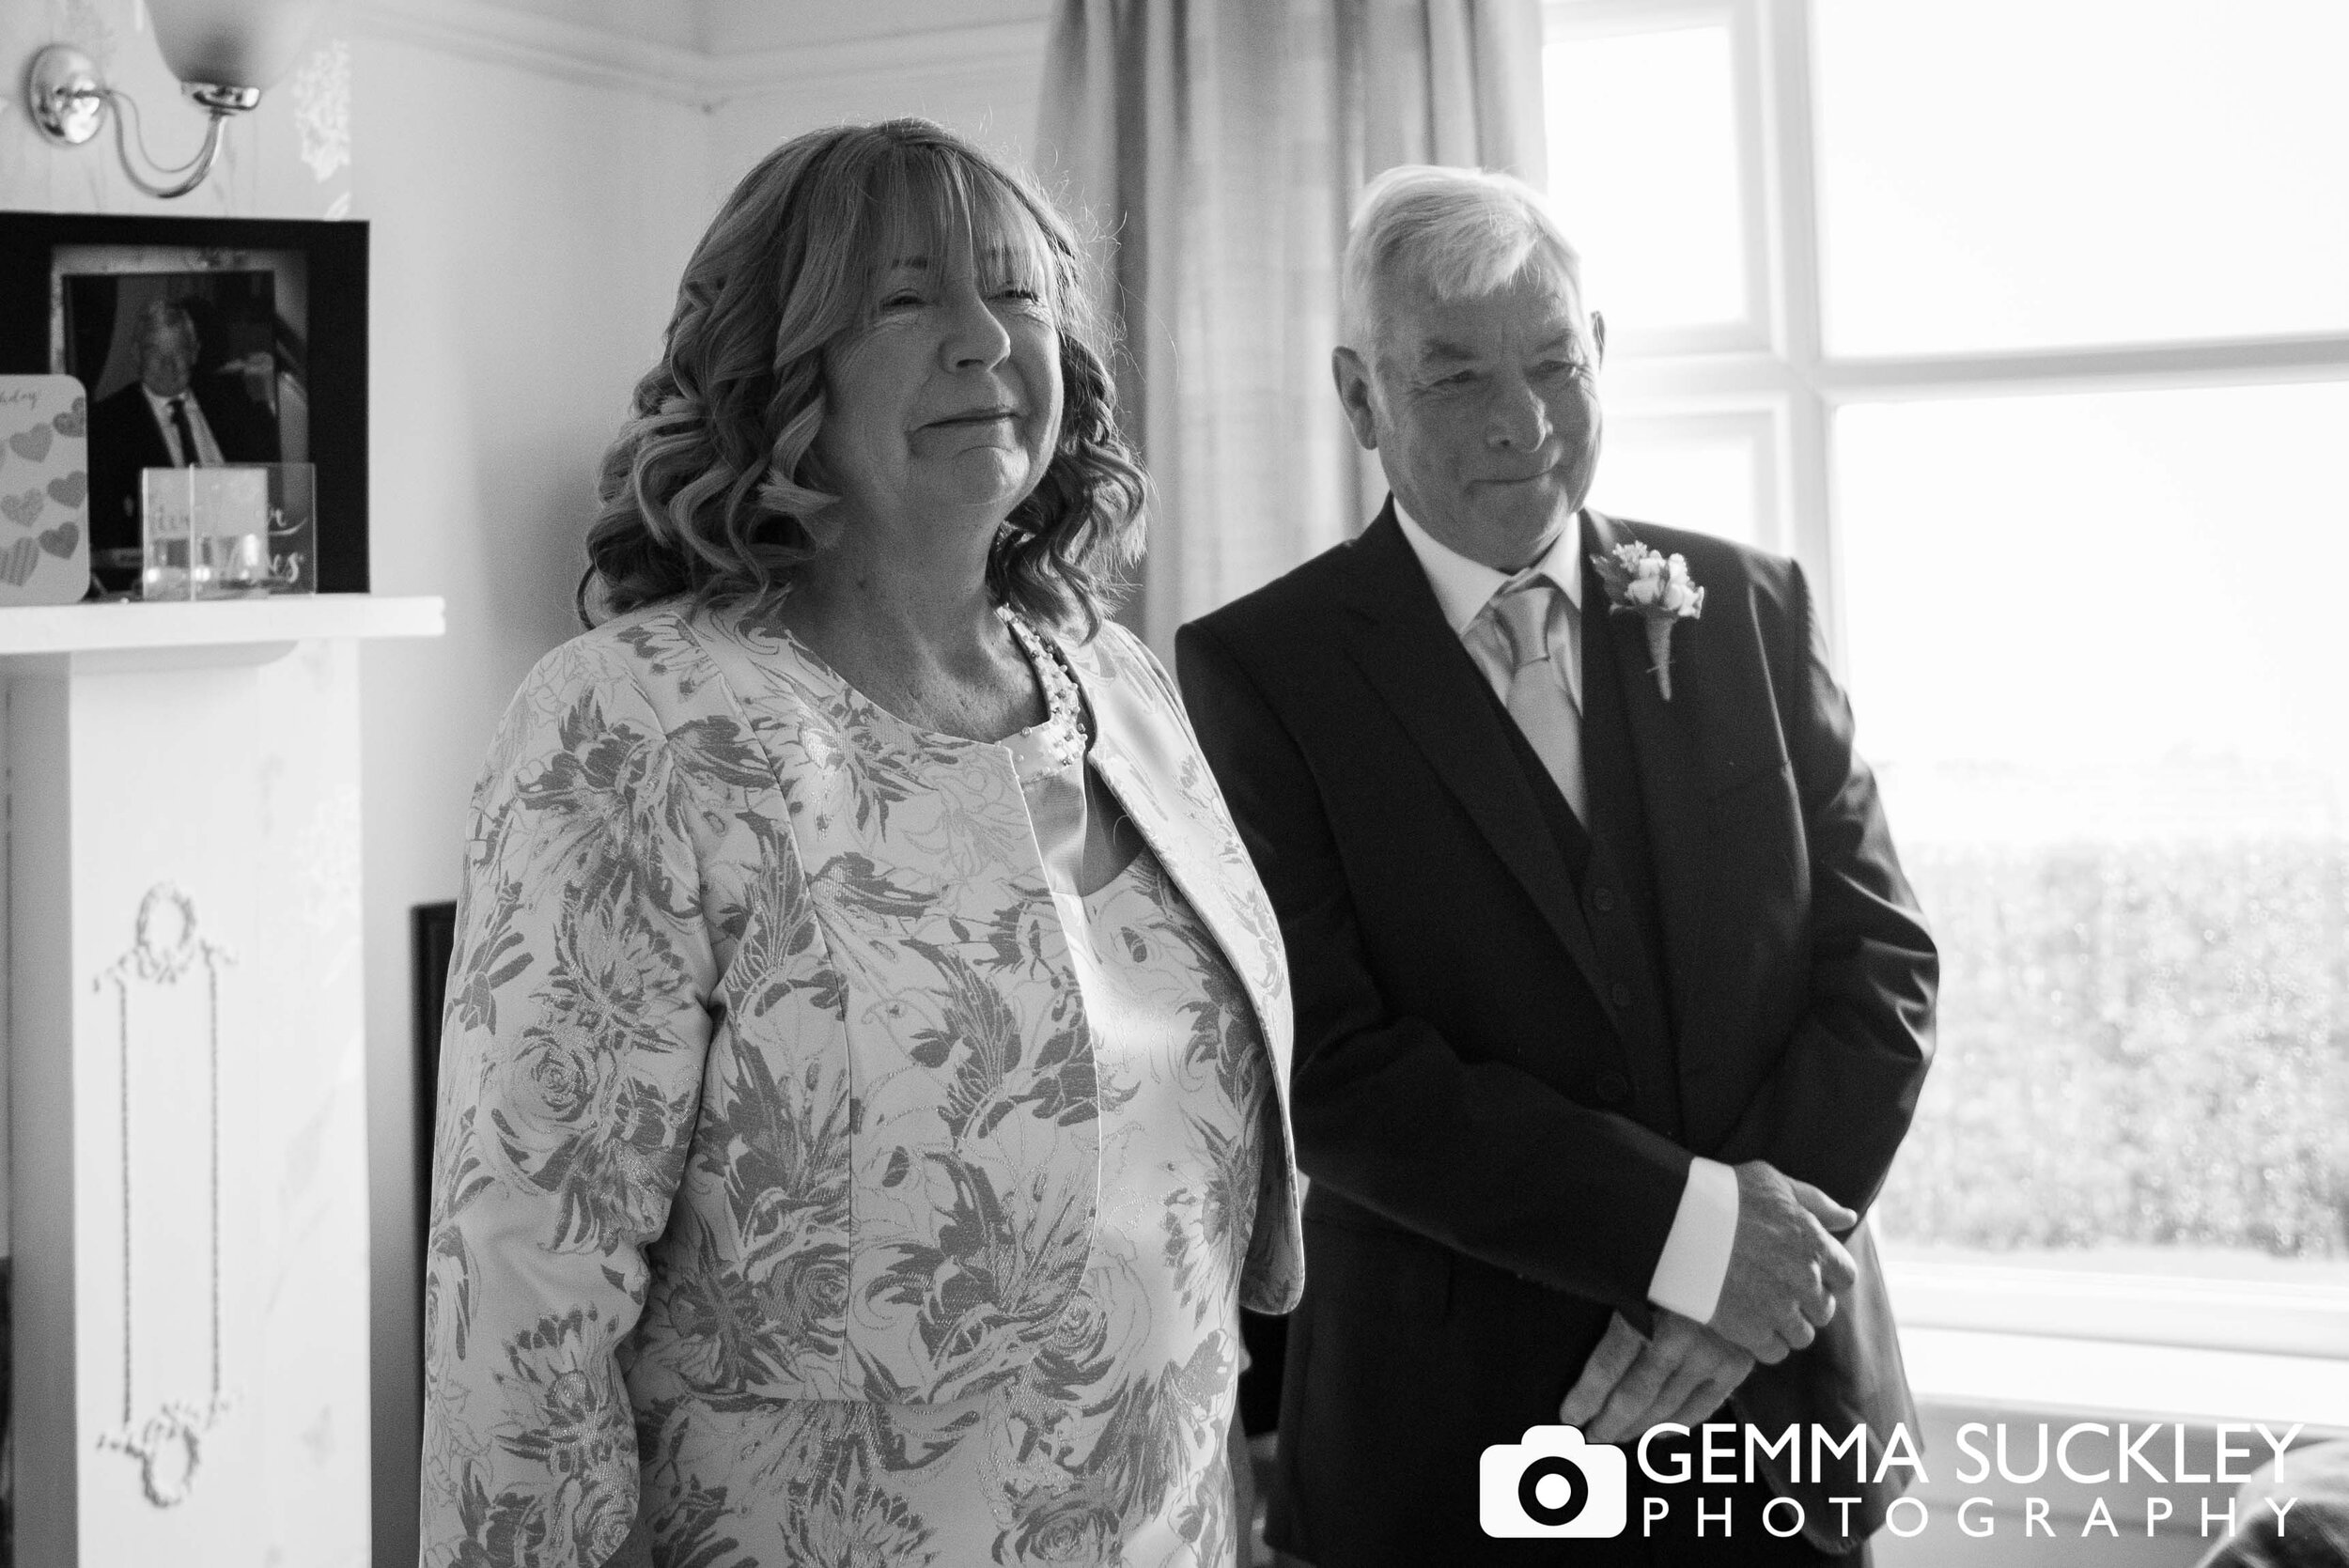 mother and father of the bride looking emotional as the bride enters the room